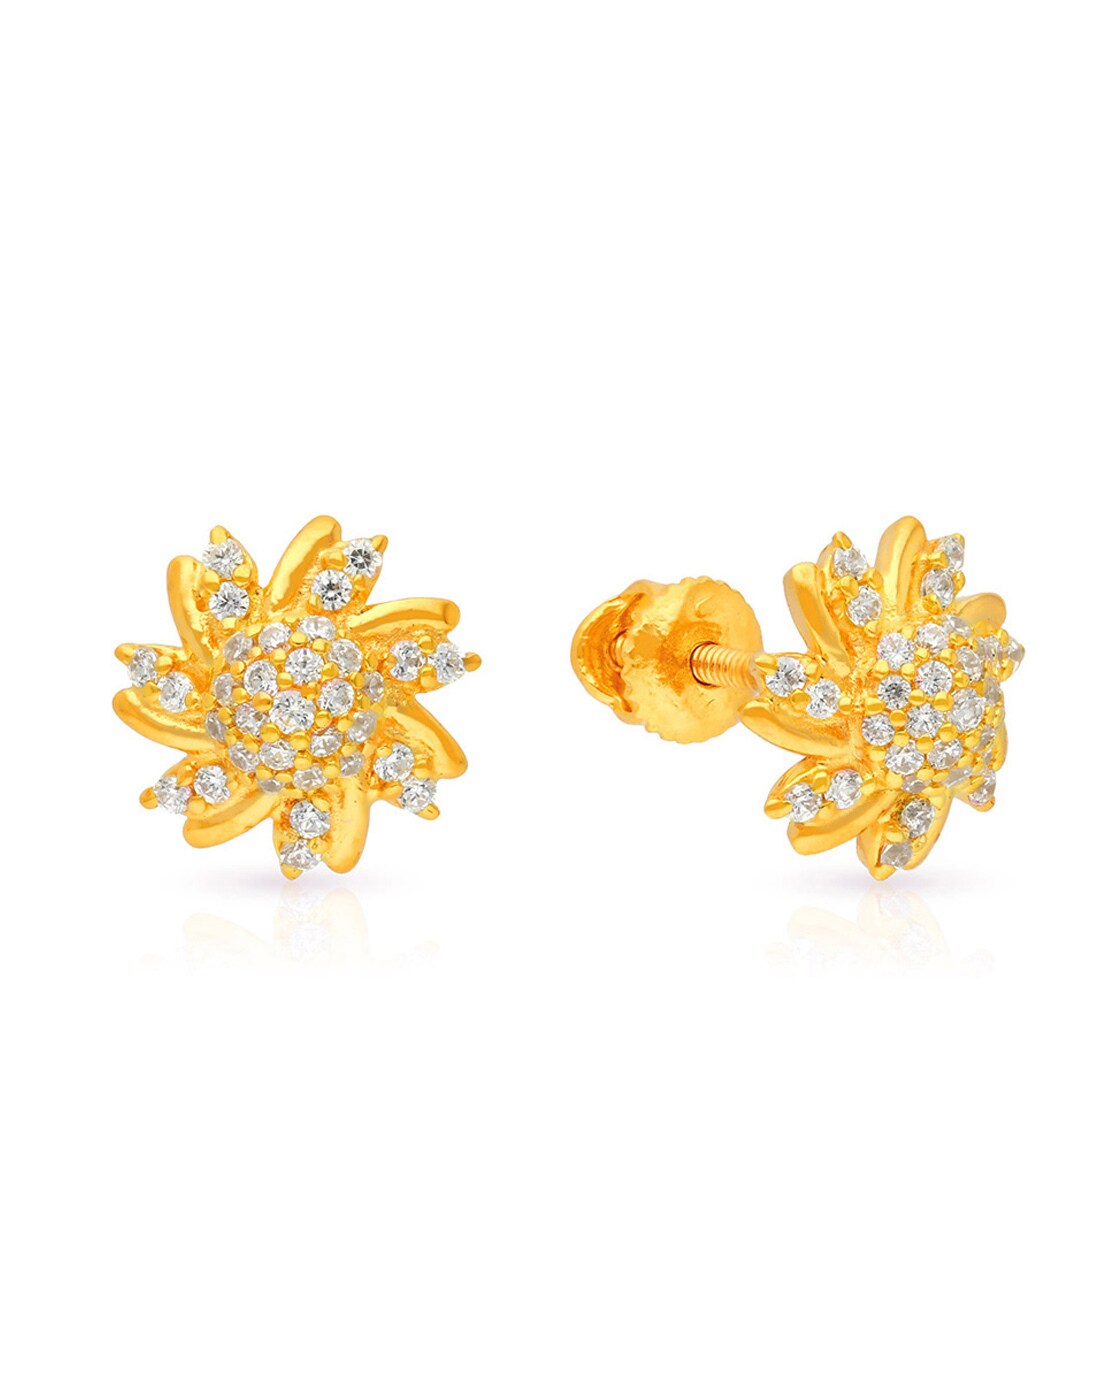 Tanishq Mesmerising Traditional Gold Stud Earrings Price Starting From Rs  30,267. Find Verified Sellers in Latur - JdMart